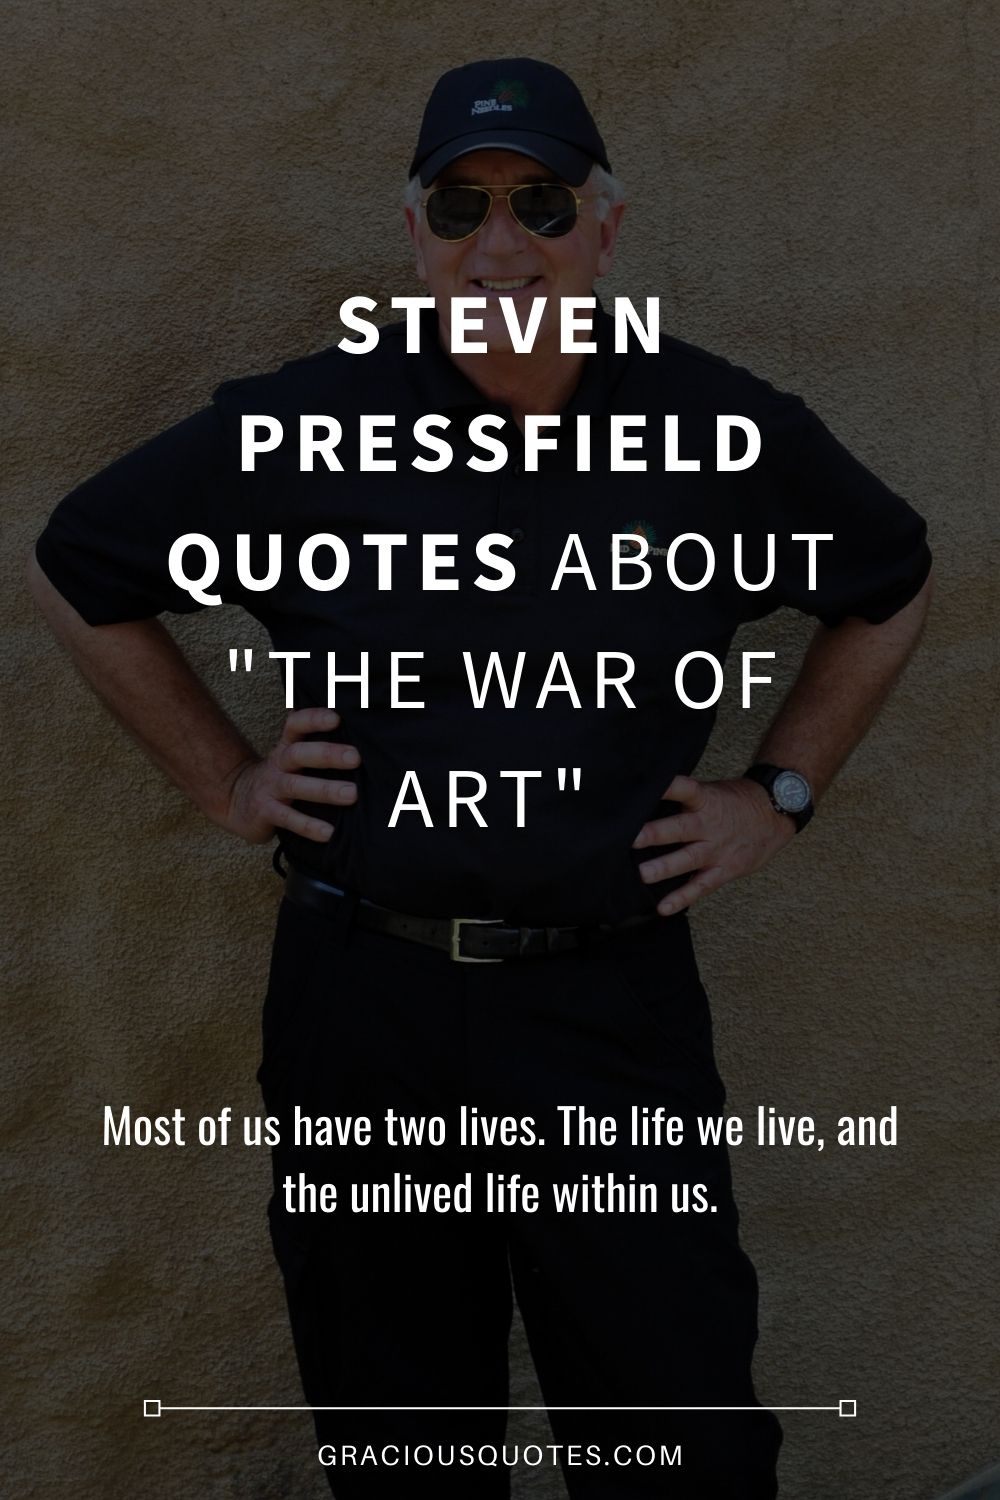 Steven-Pressfield-Quotes-About-22The-War-of-Art22-Gracious-Quotes